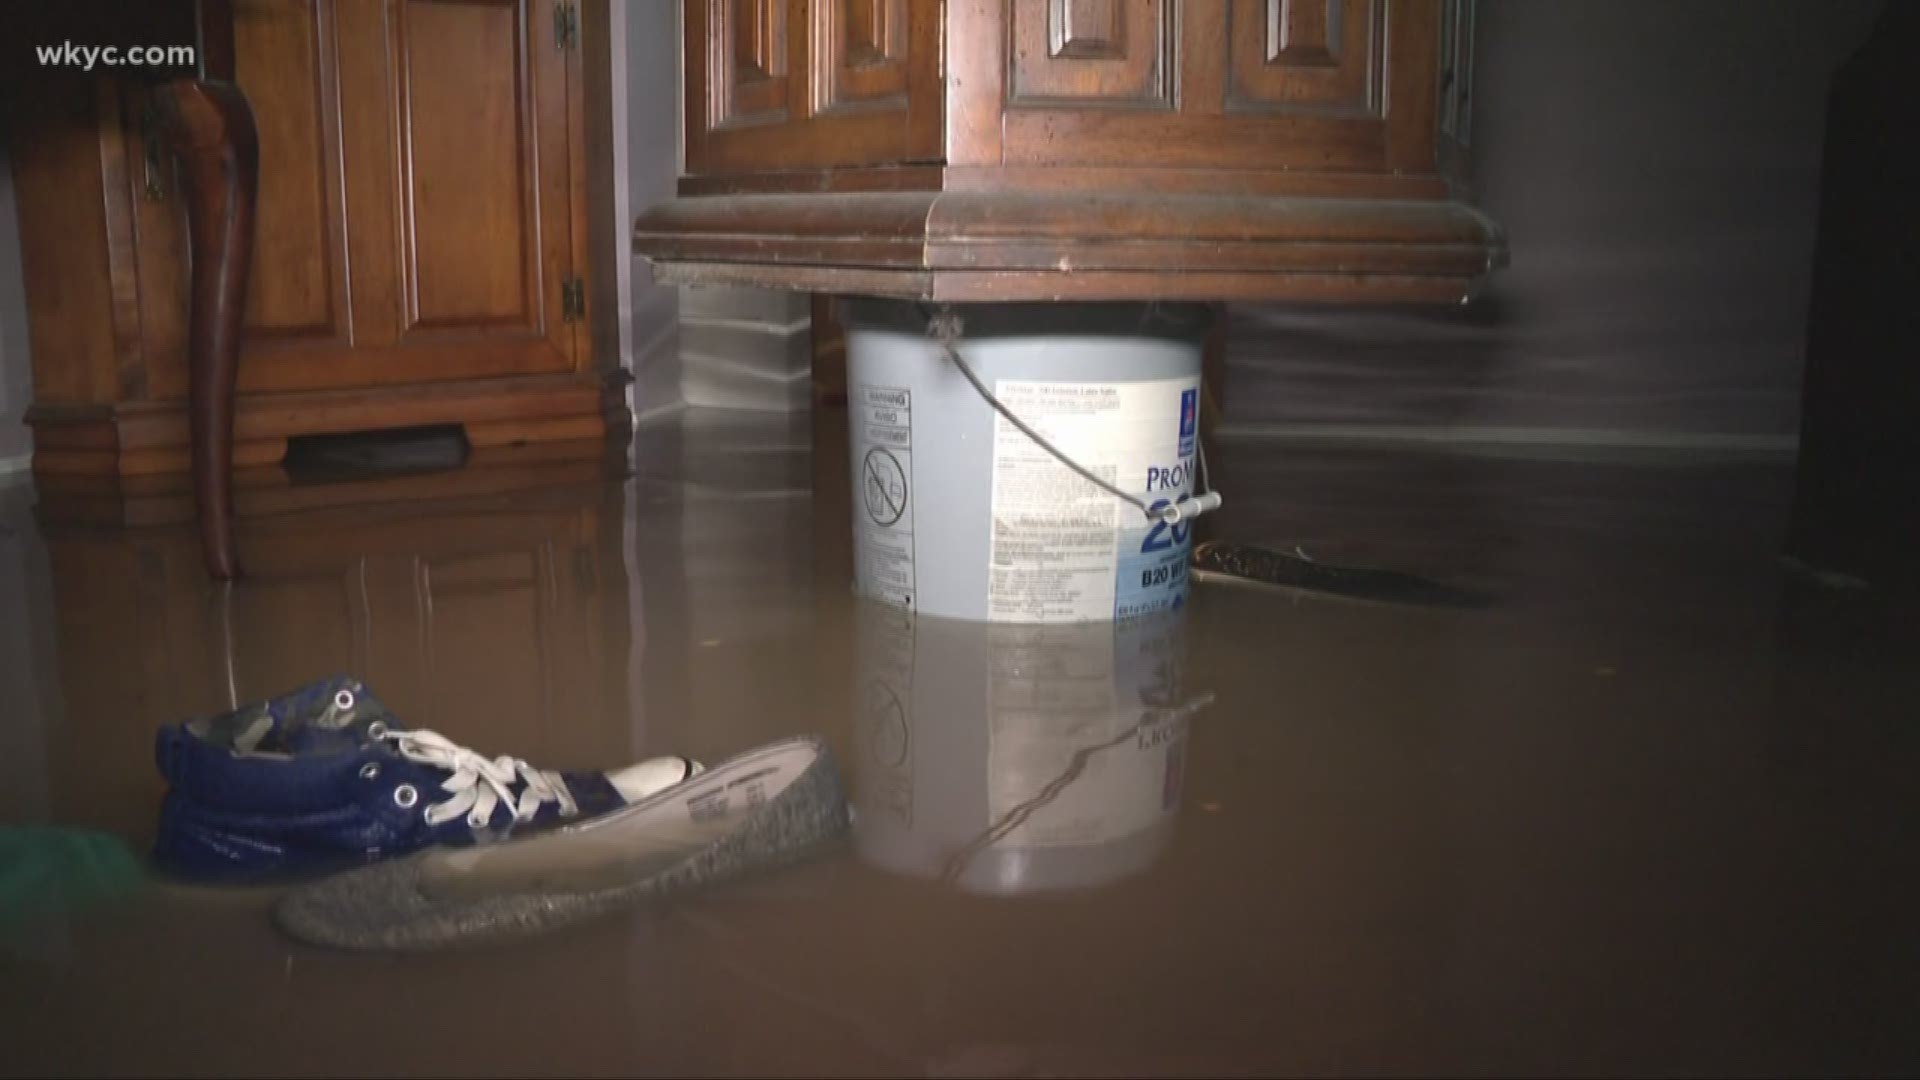 Quick storms rolled through Northeast Ohio on Friday, dumping several inches of rain in parts of our viewing area. Unfortunately for people in Parma and North Royalton, it has meant that their weekends have started by cleaning out flooded houses